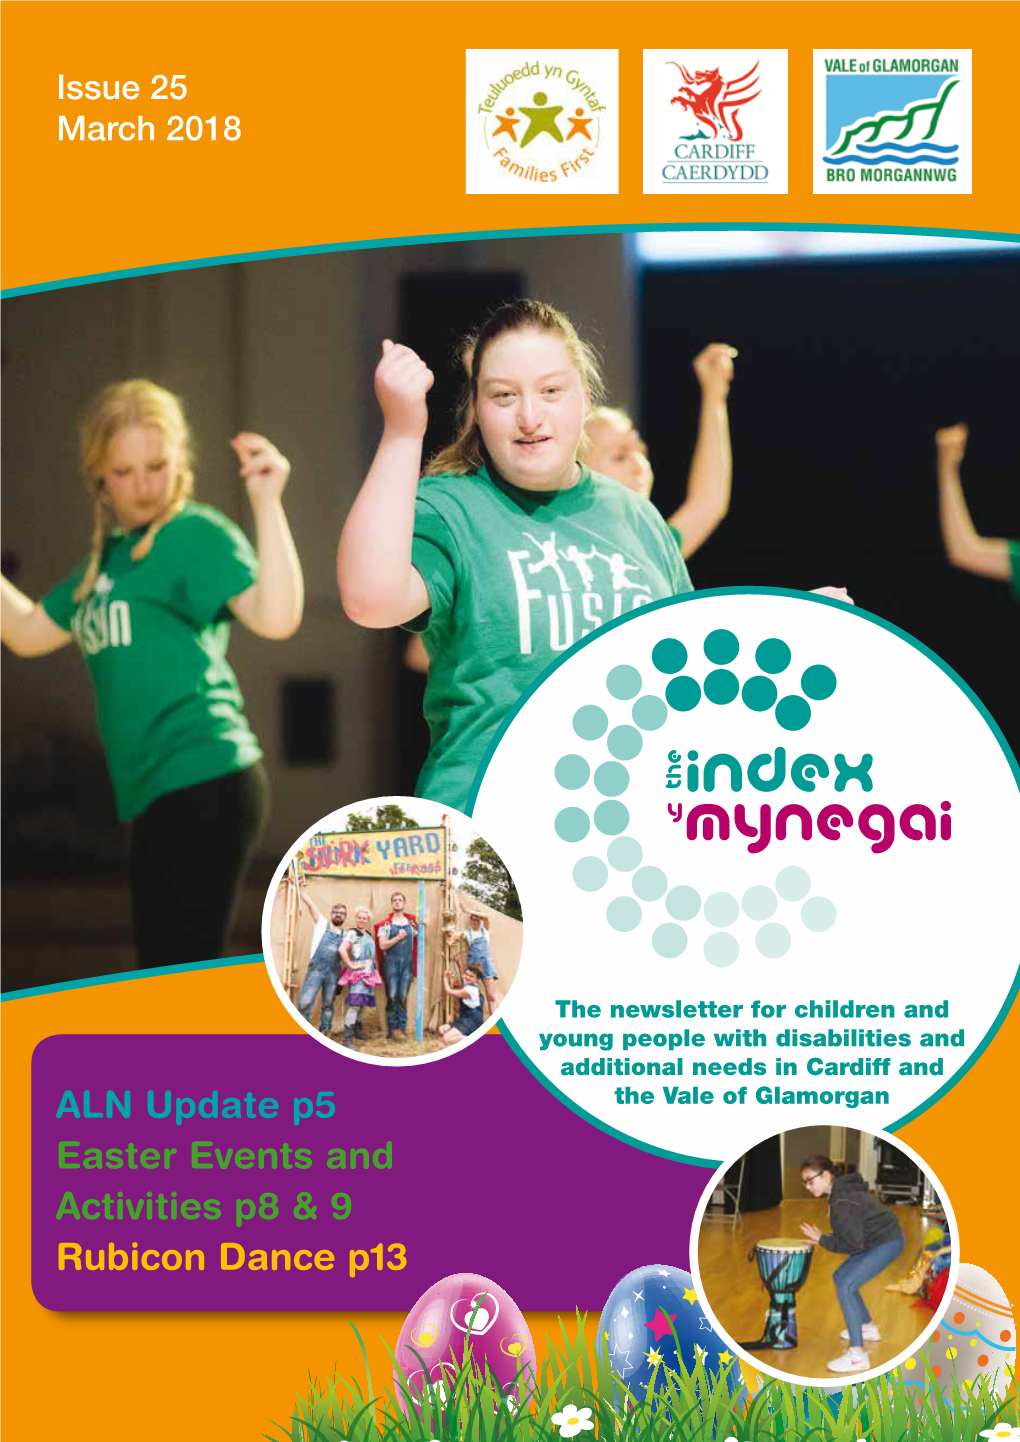 ALN Update P5 Easter Events and Activities P8 & 9 Rubicon Dance